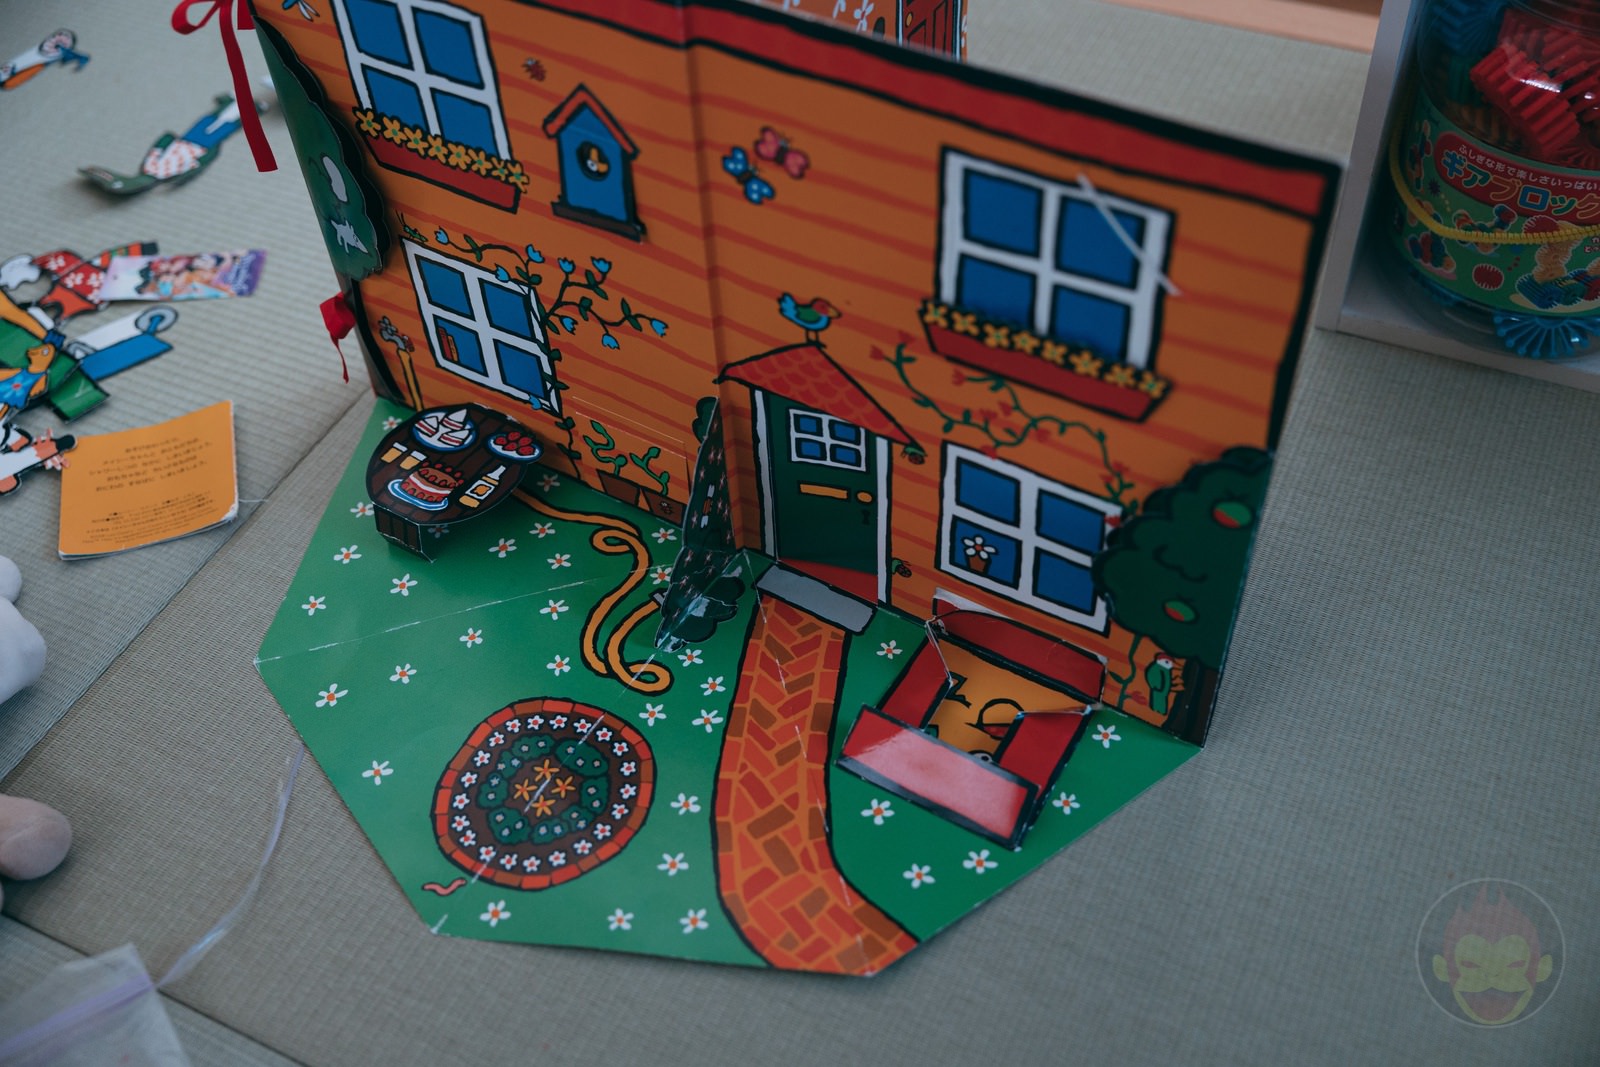 Maisy Book that becomes a doll house 05